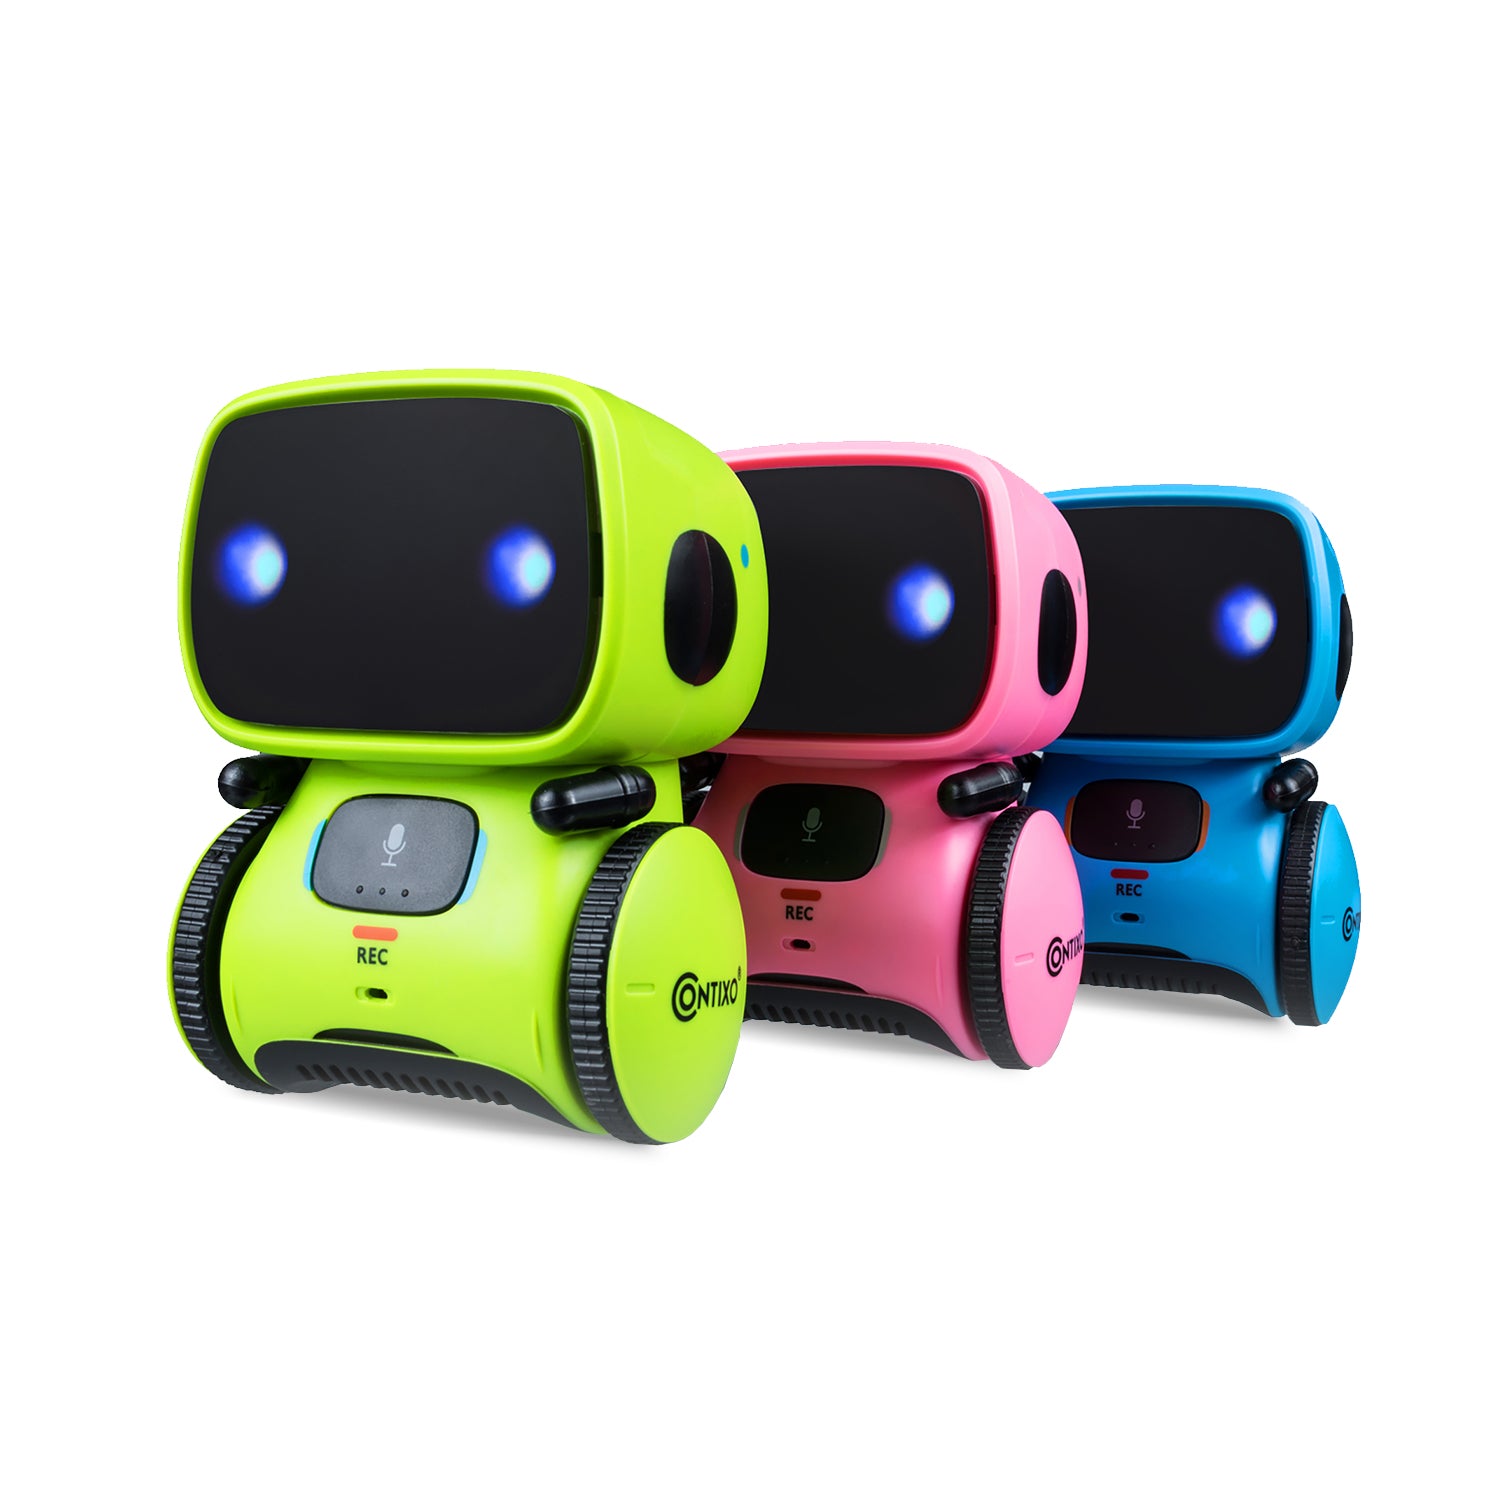 Contixo R1 Learning Educational Kids Robot Toy - 20439986